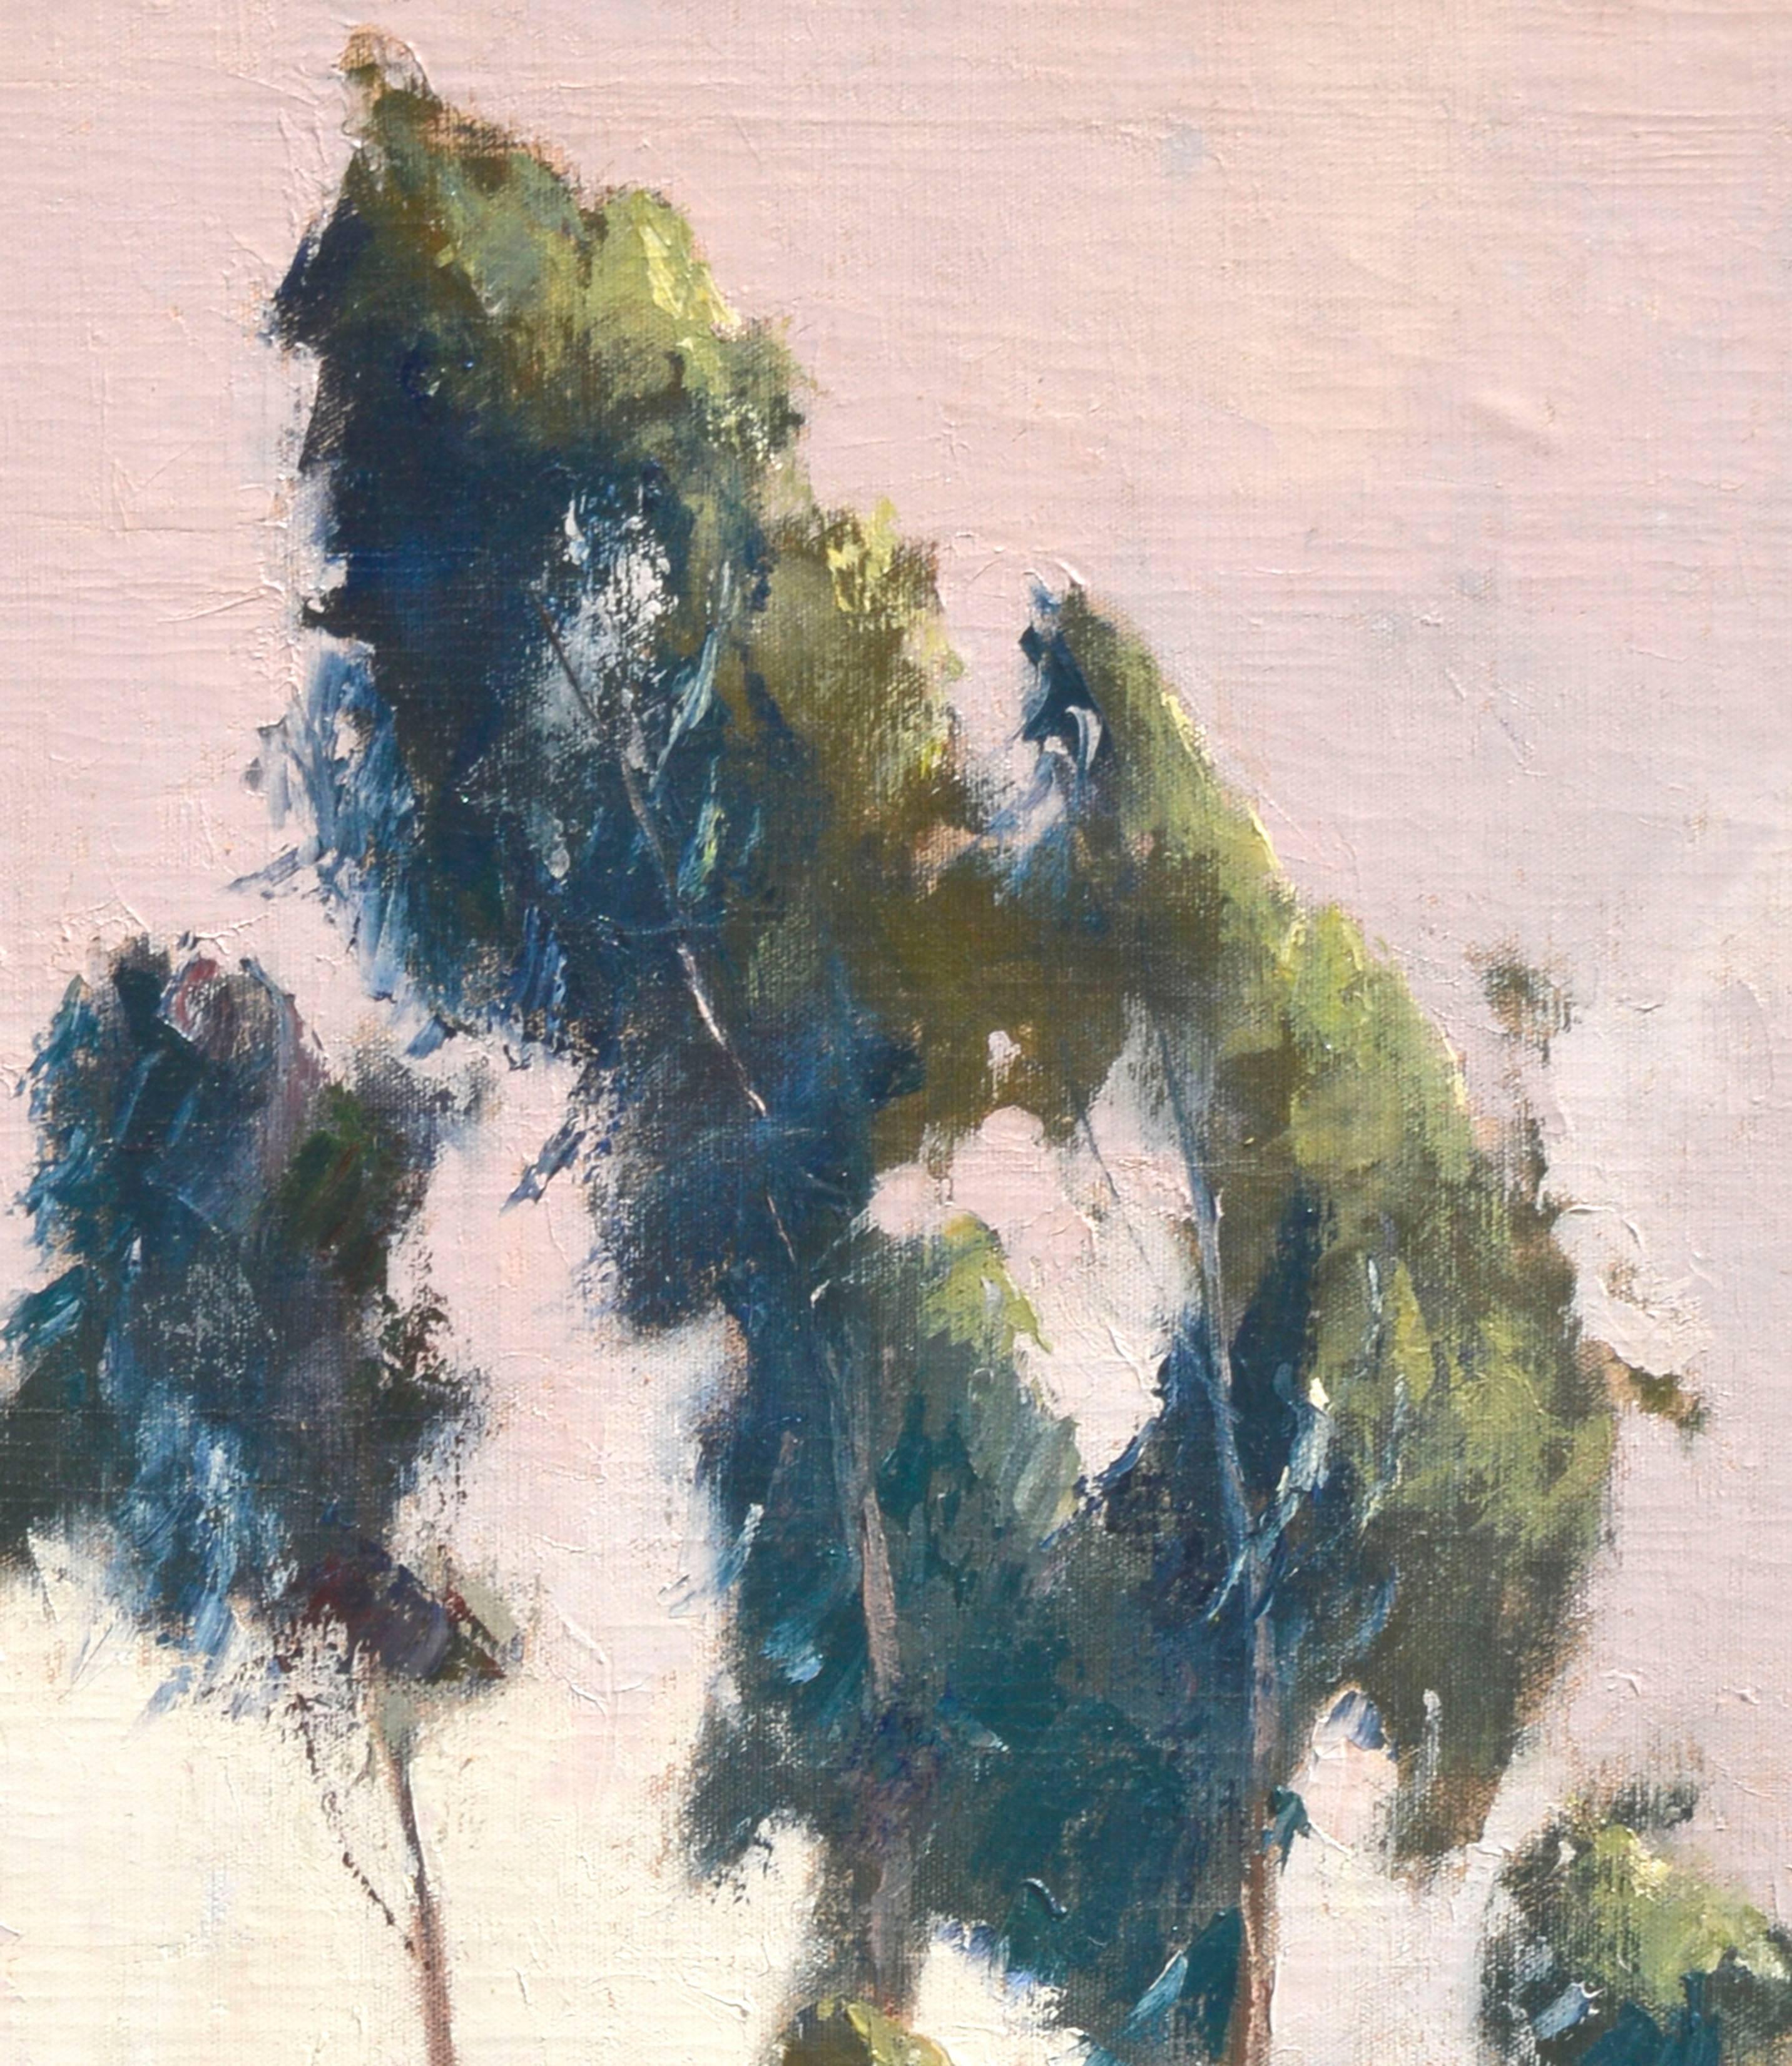 Roadside Eucalyptus Trees, Mid Century Vertical Landscape by Jon Blanchette 

Gorgeous mid-century plein air landscape painting of a tall Eucalyptus tree along a California road side by Jon Blanchette (American, 1908-1987), c.1960. The vertical